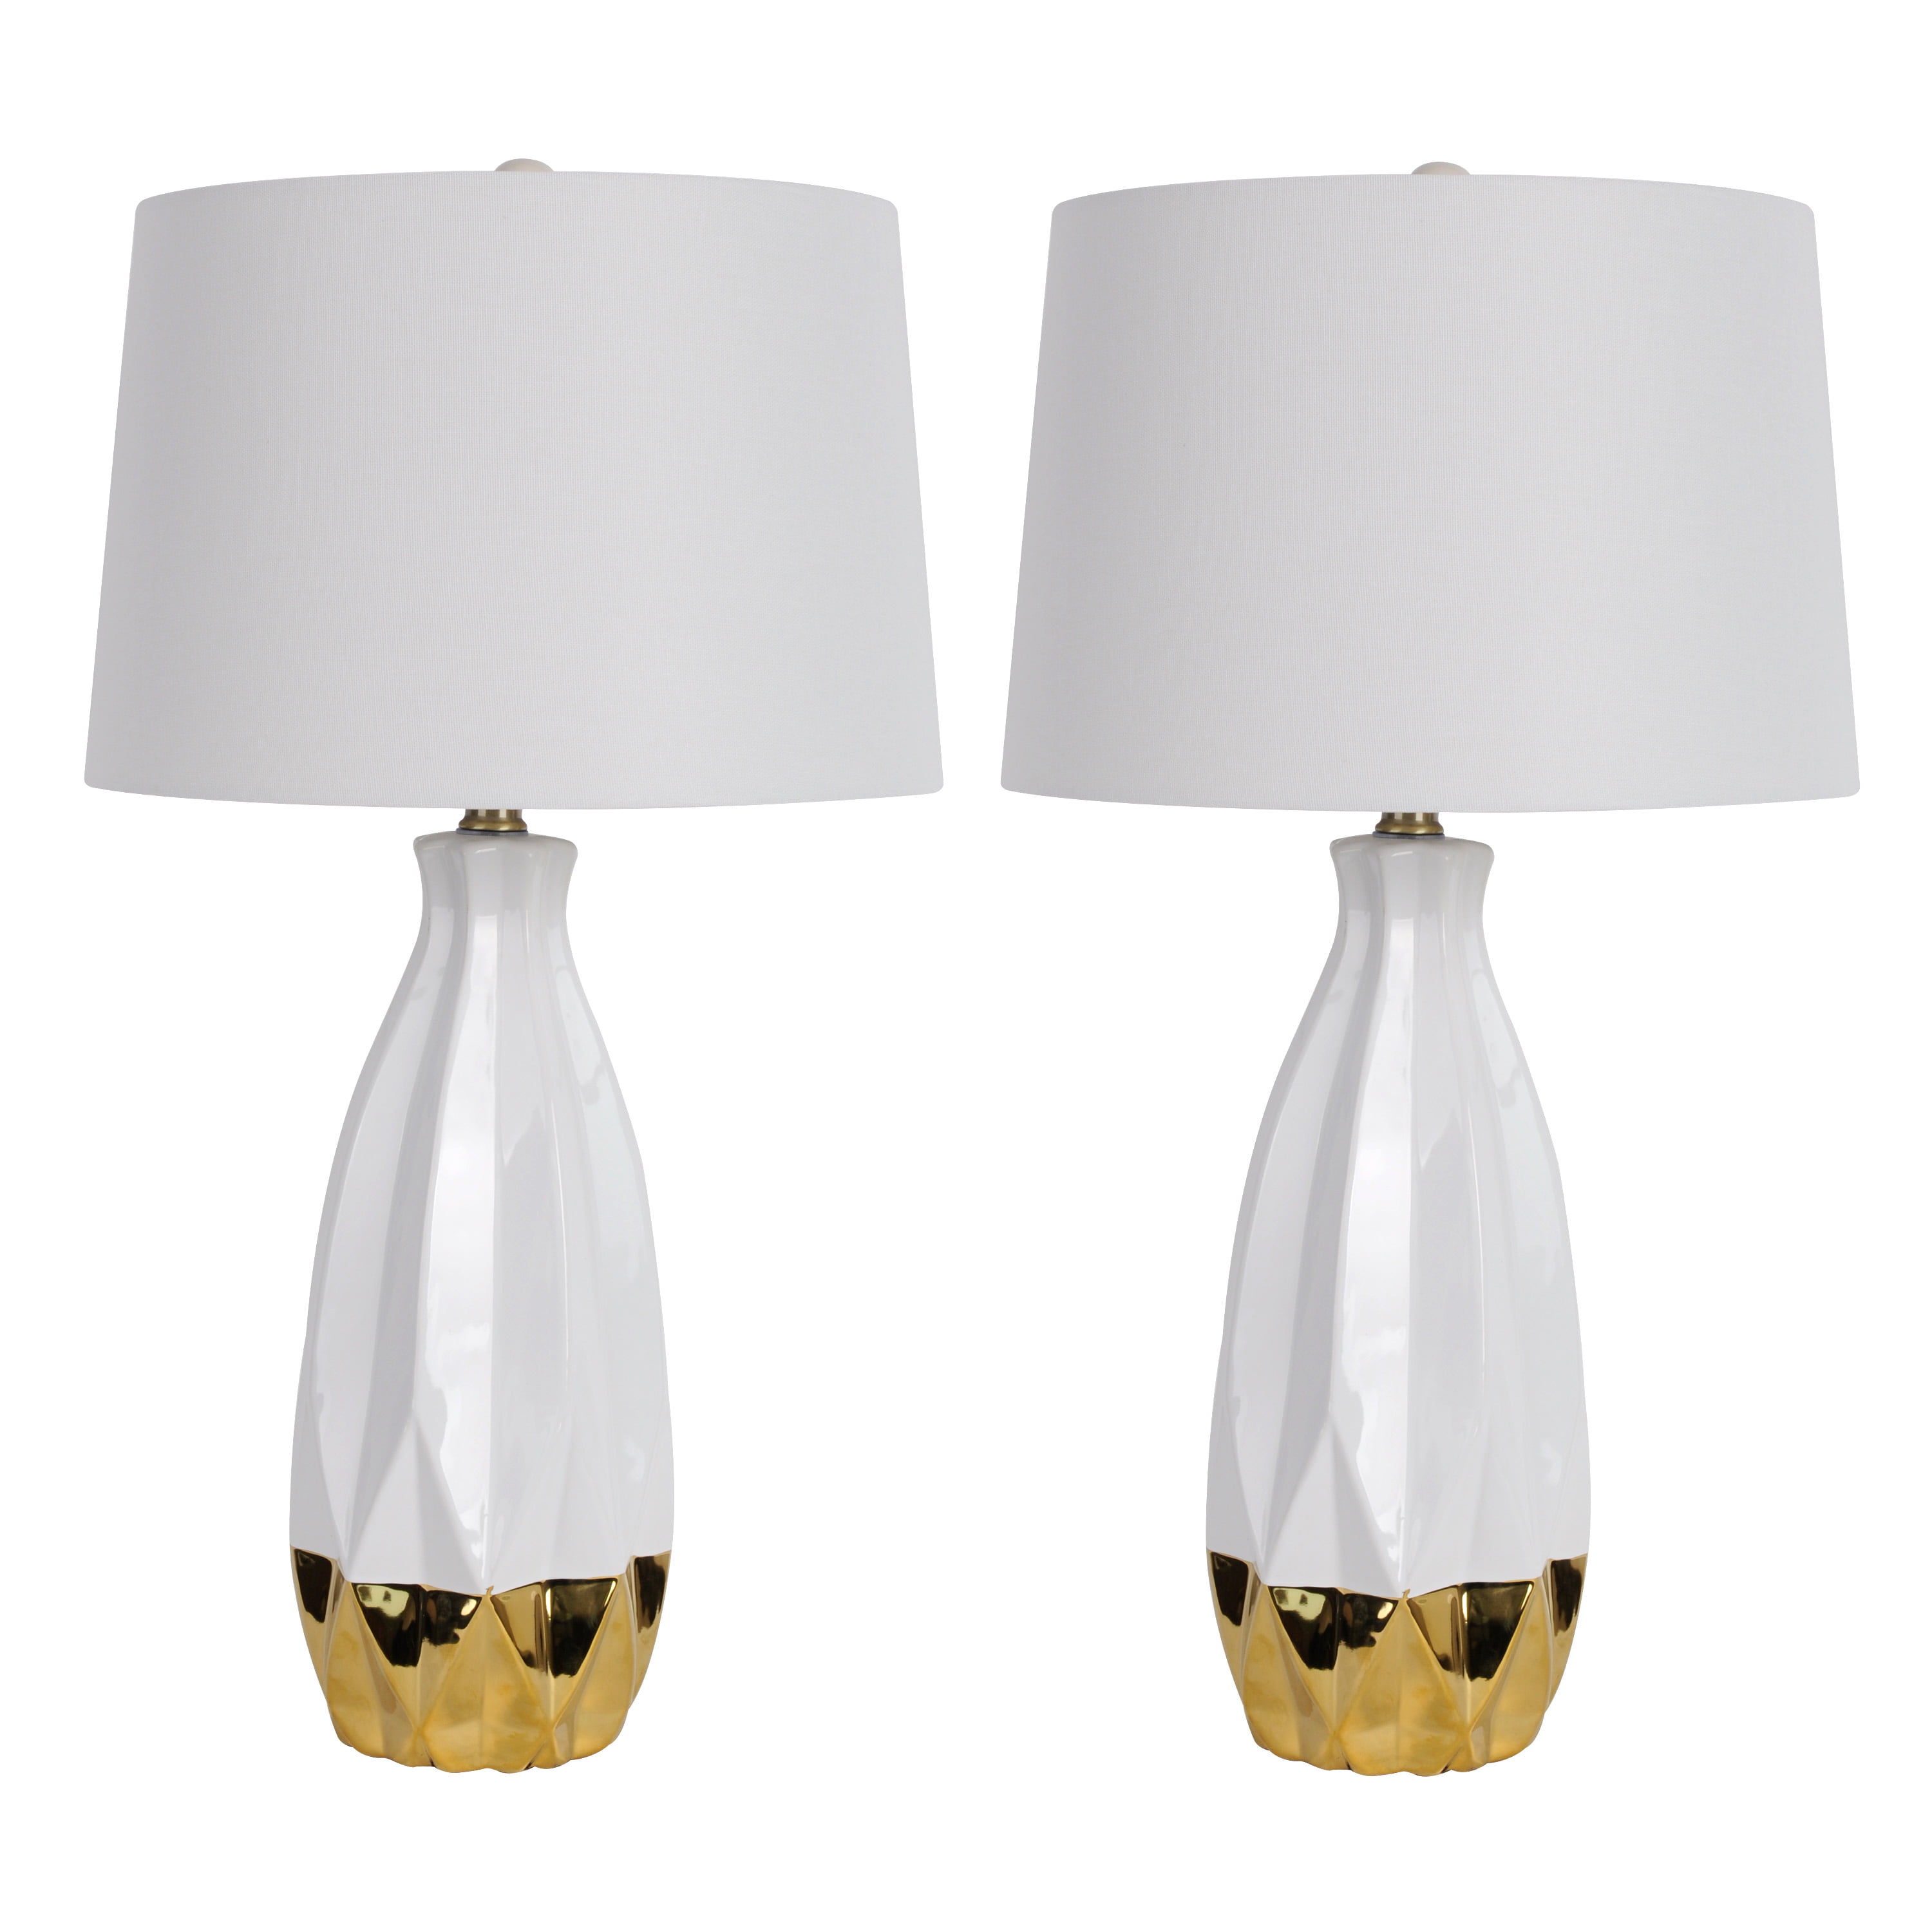 Decor Therapy White Gold Dipped Ceramic, Set Of 2 Ceramic Table Lamps Decor Therapy